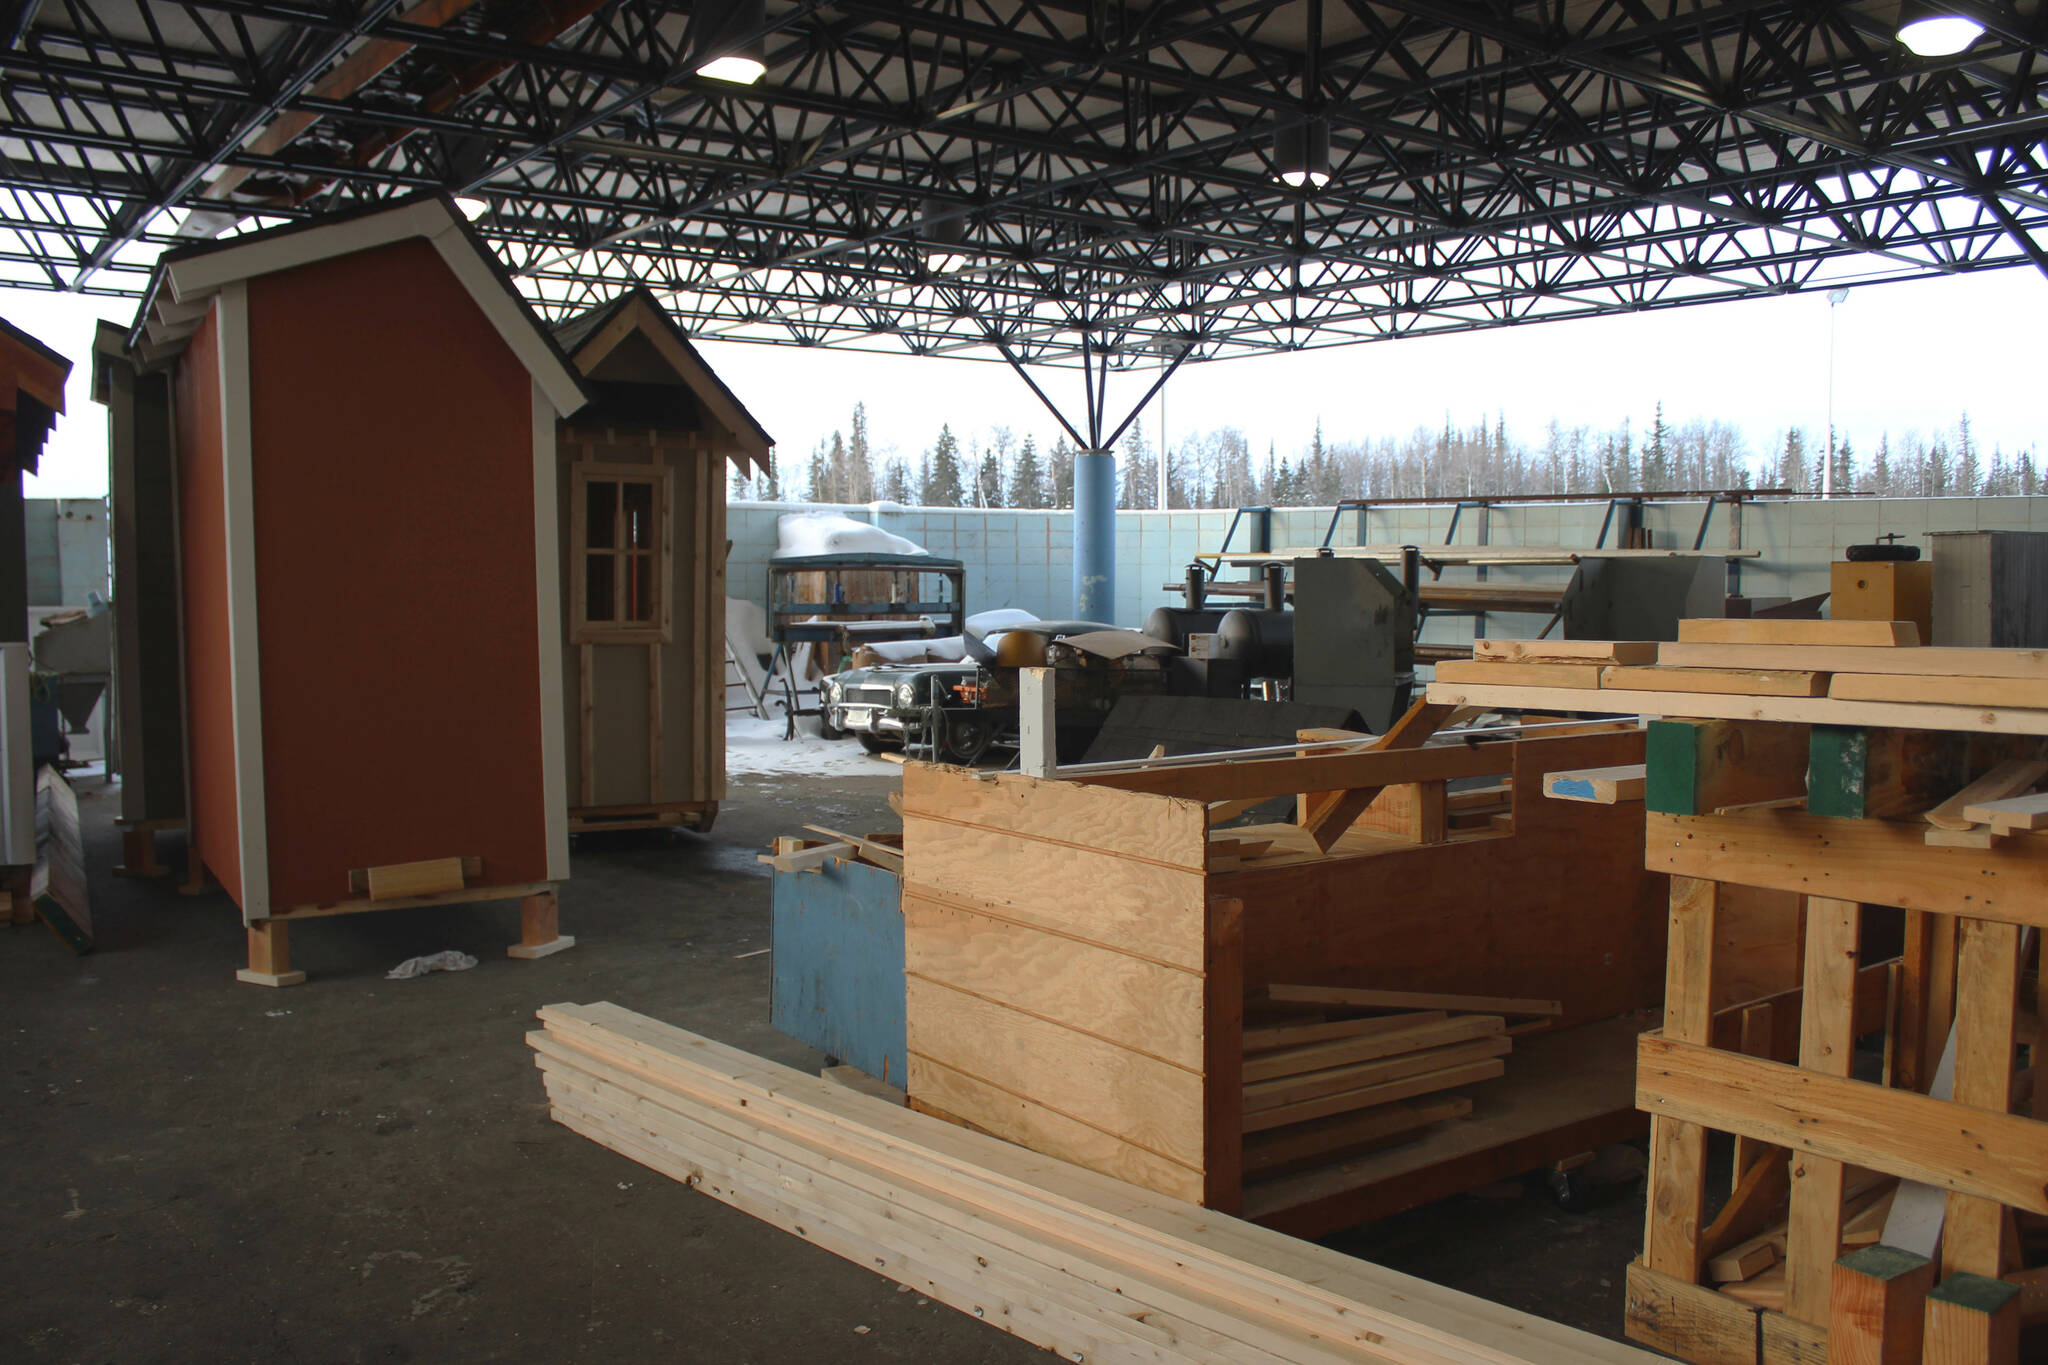 Construction materials and projects sit outside of a Soldotna High School classroom on Wednesday, Feb. 22, 2023 in Soldotna, Alaska. (Ashlyn O’Hara/Peninsula Clarion)